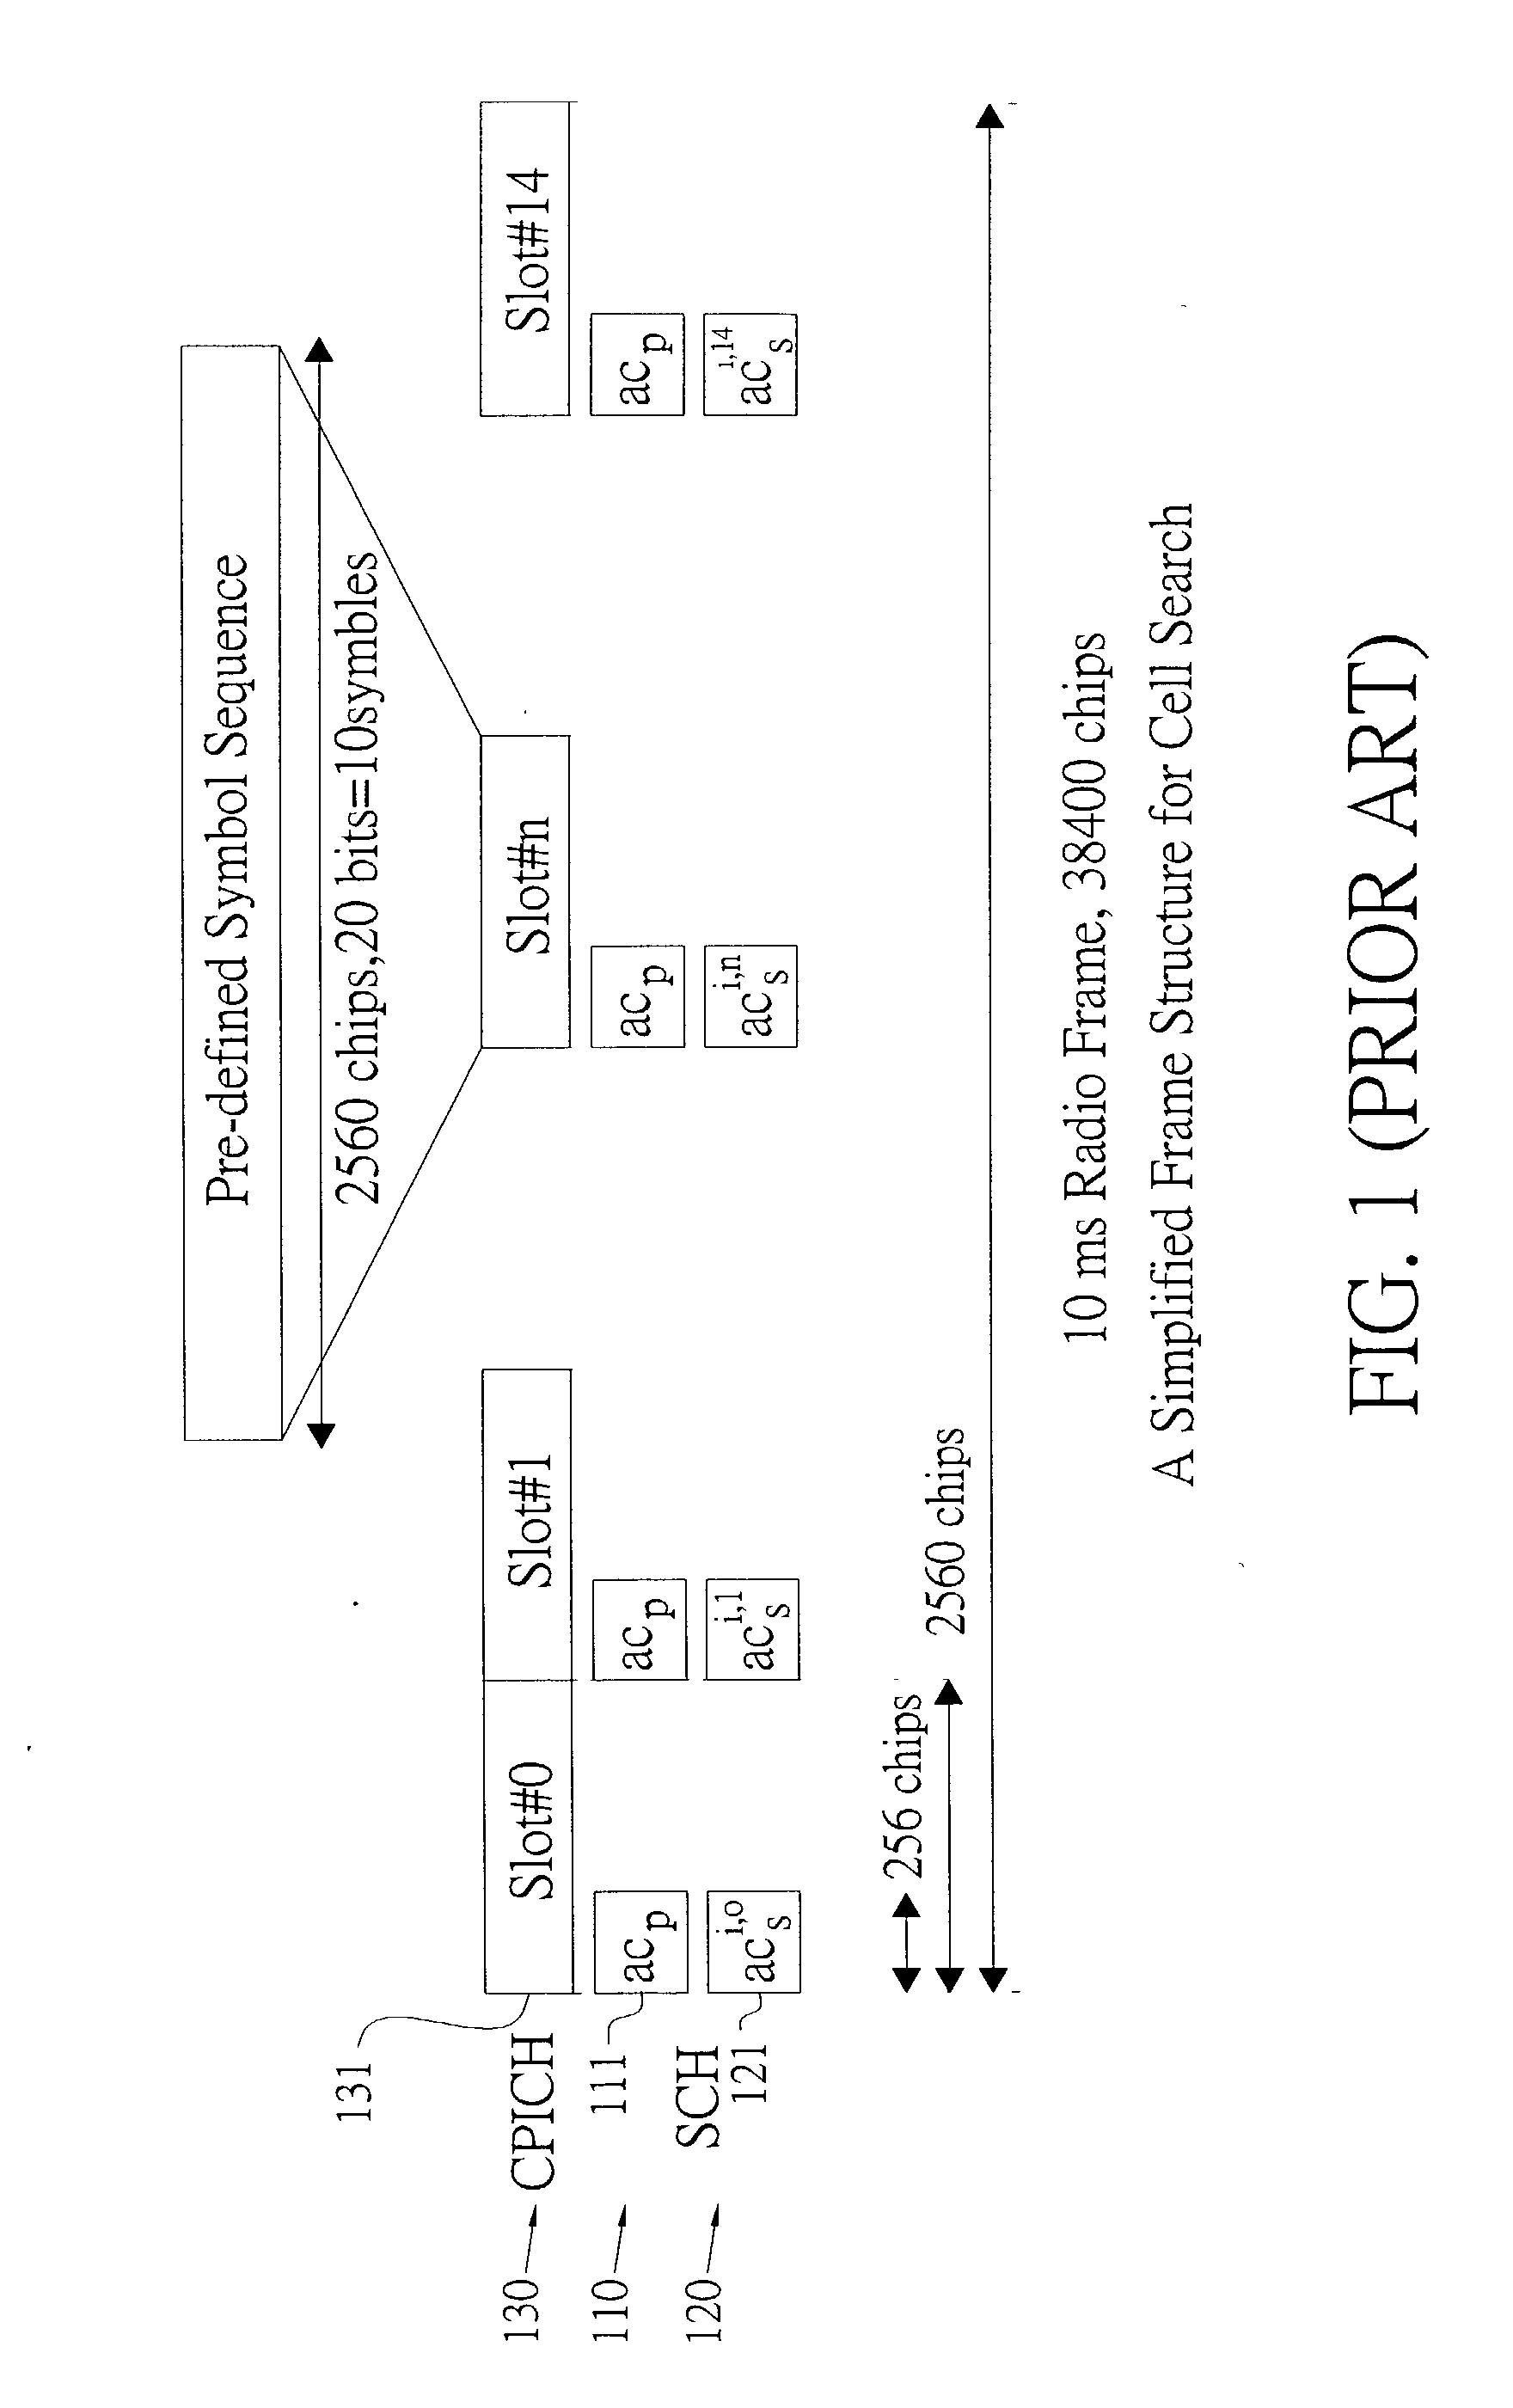 Method for cell search under effect of high clock offset